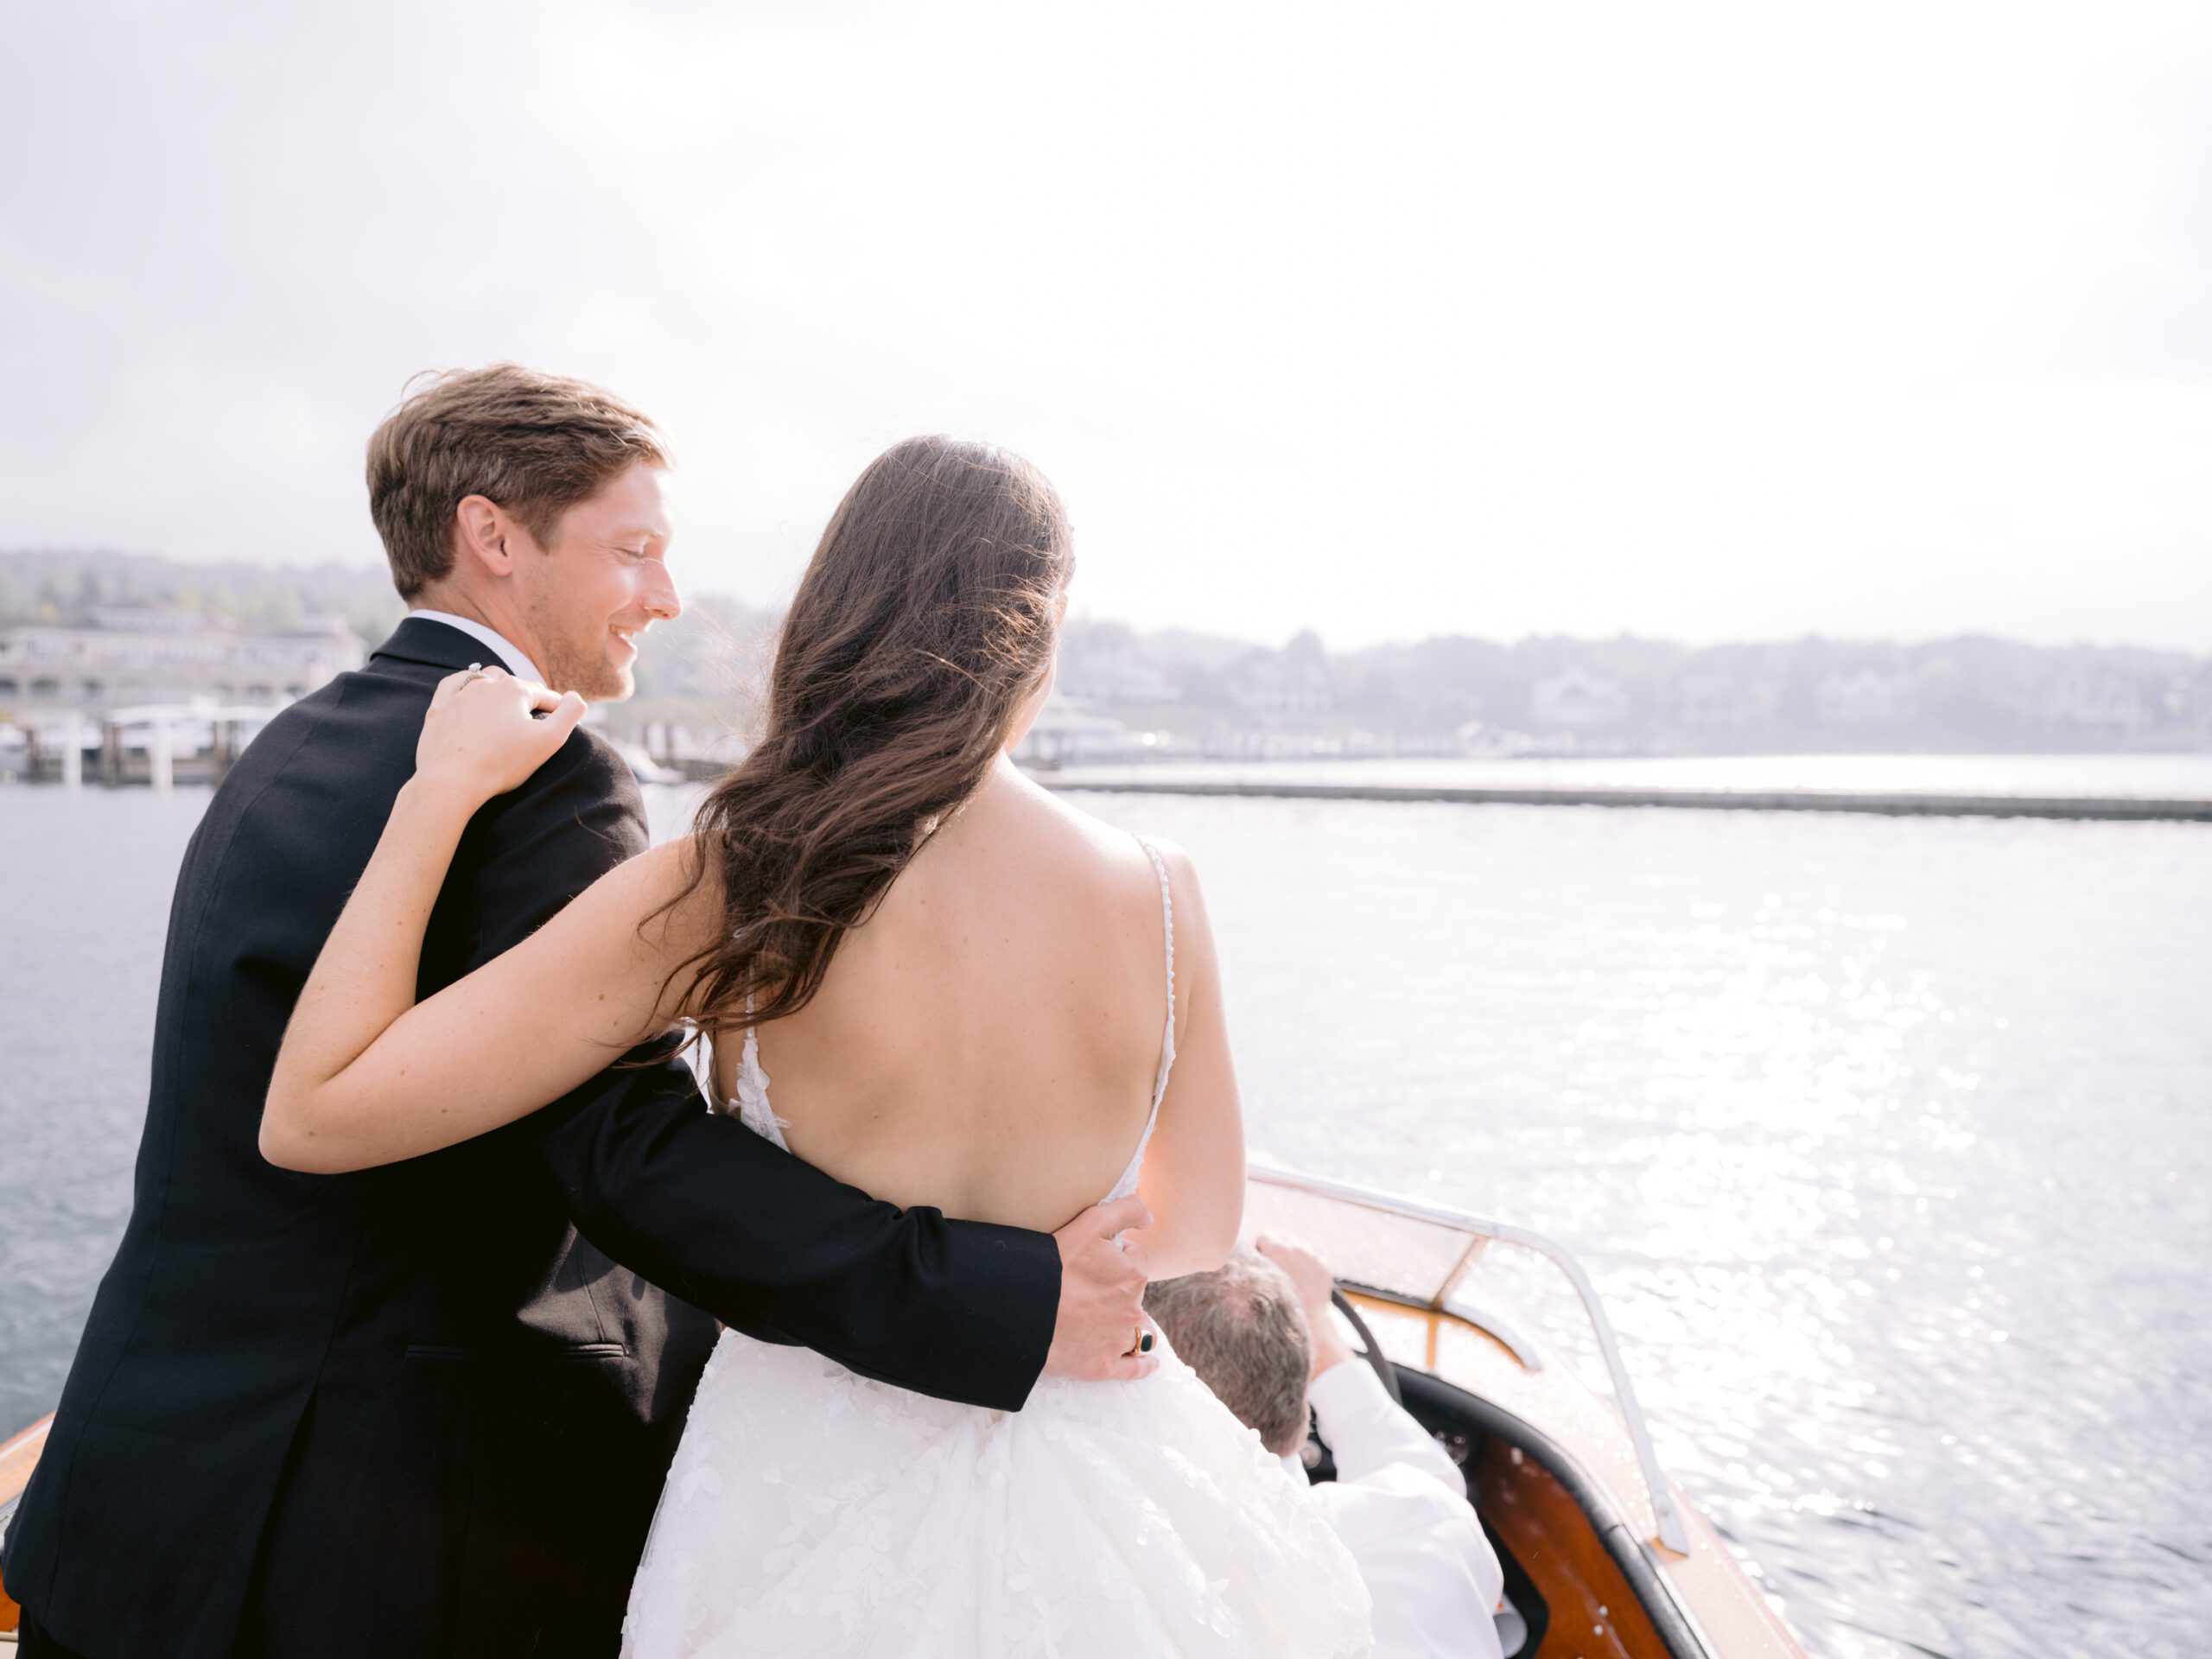 A bride and groom enjoy the sunshine on Lake Michigan boat ride